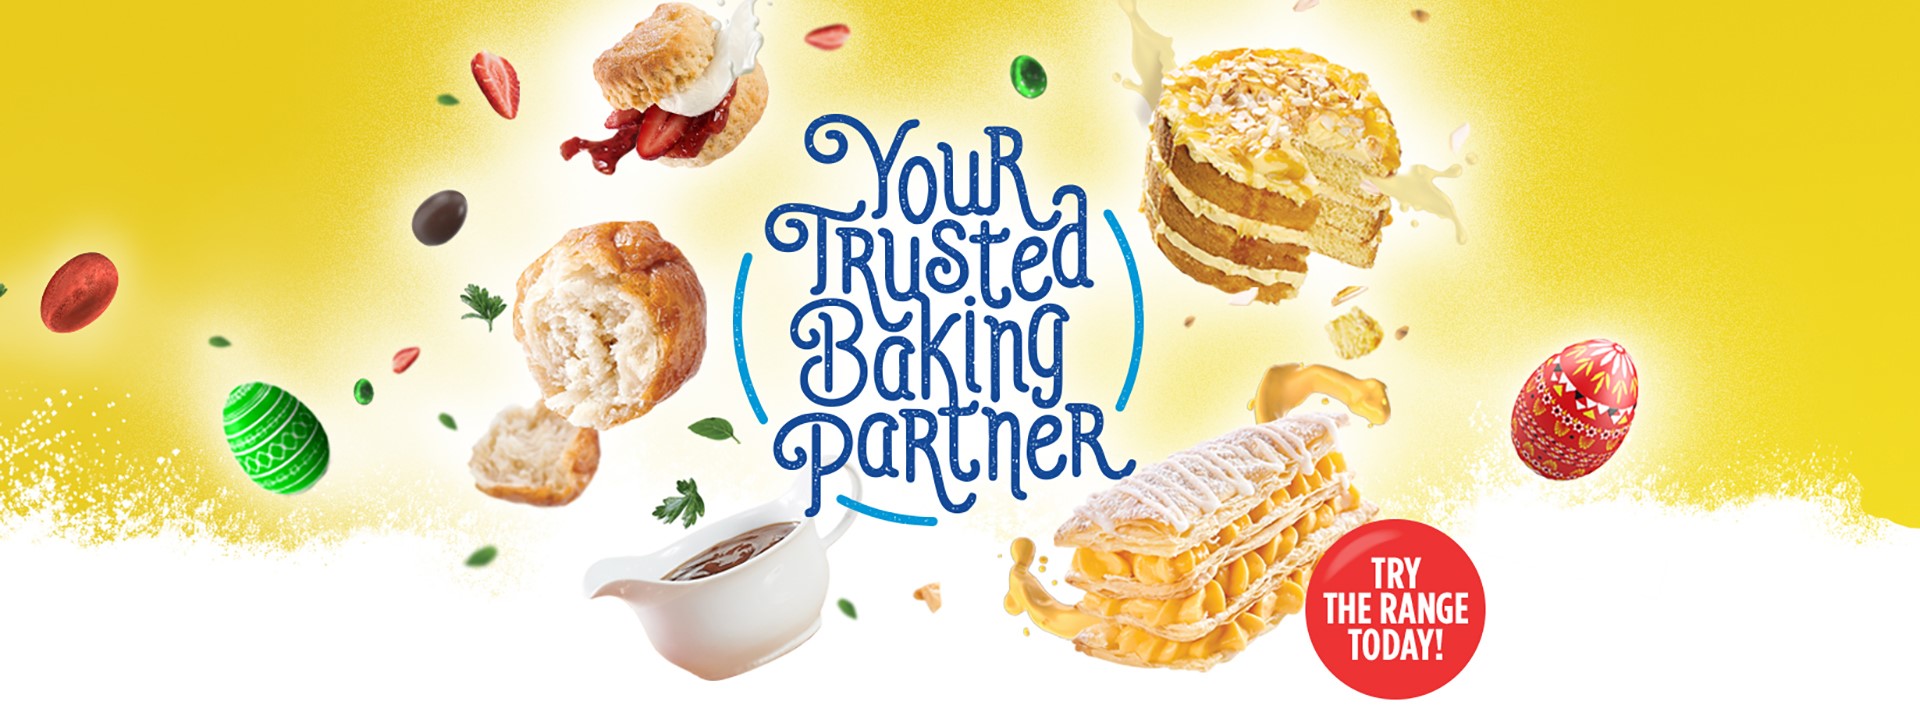 Your Trusted Baking Partner